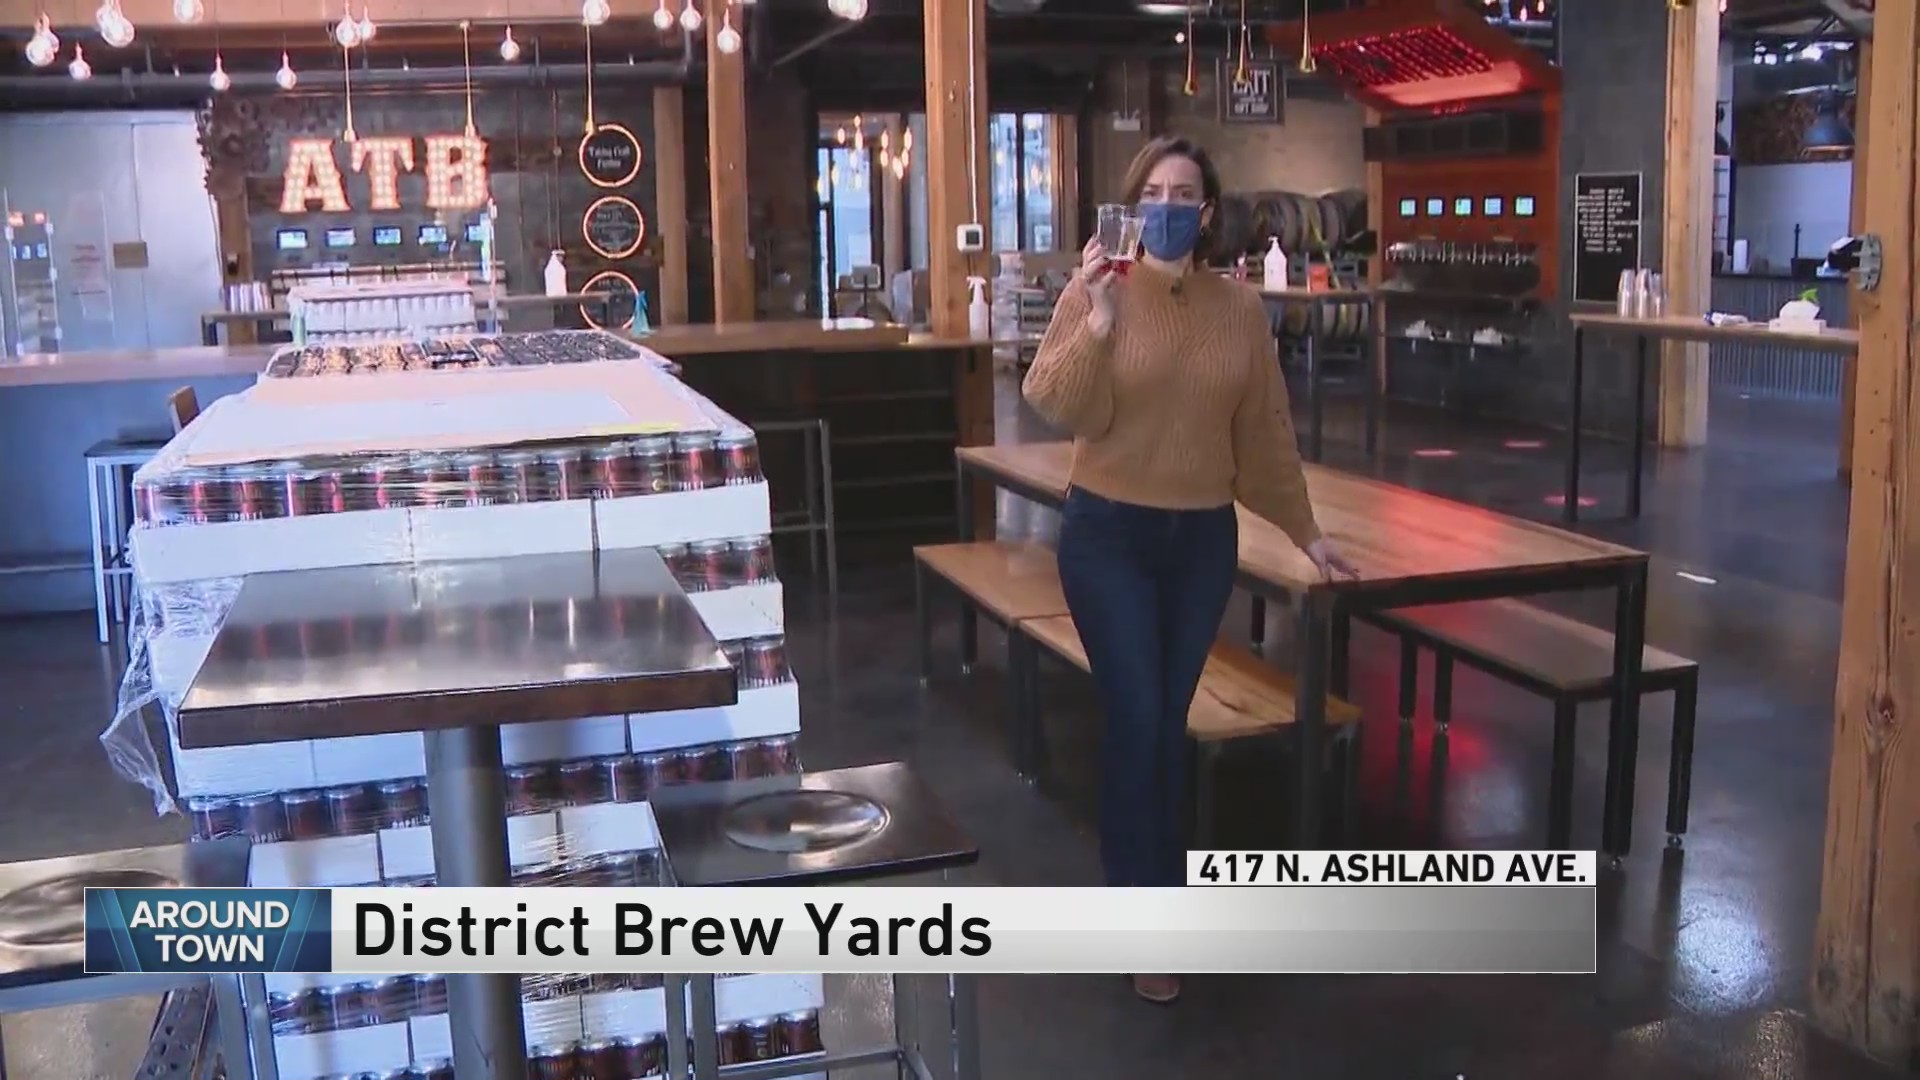 Around Town checks out District Brew Yards